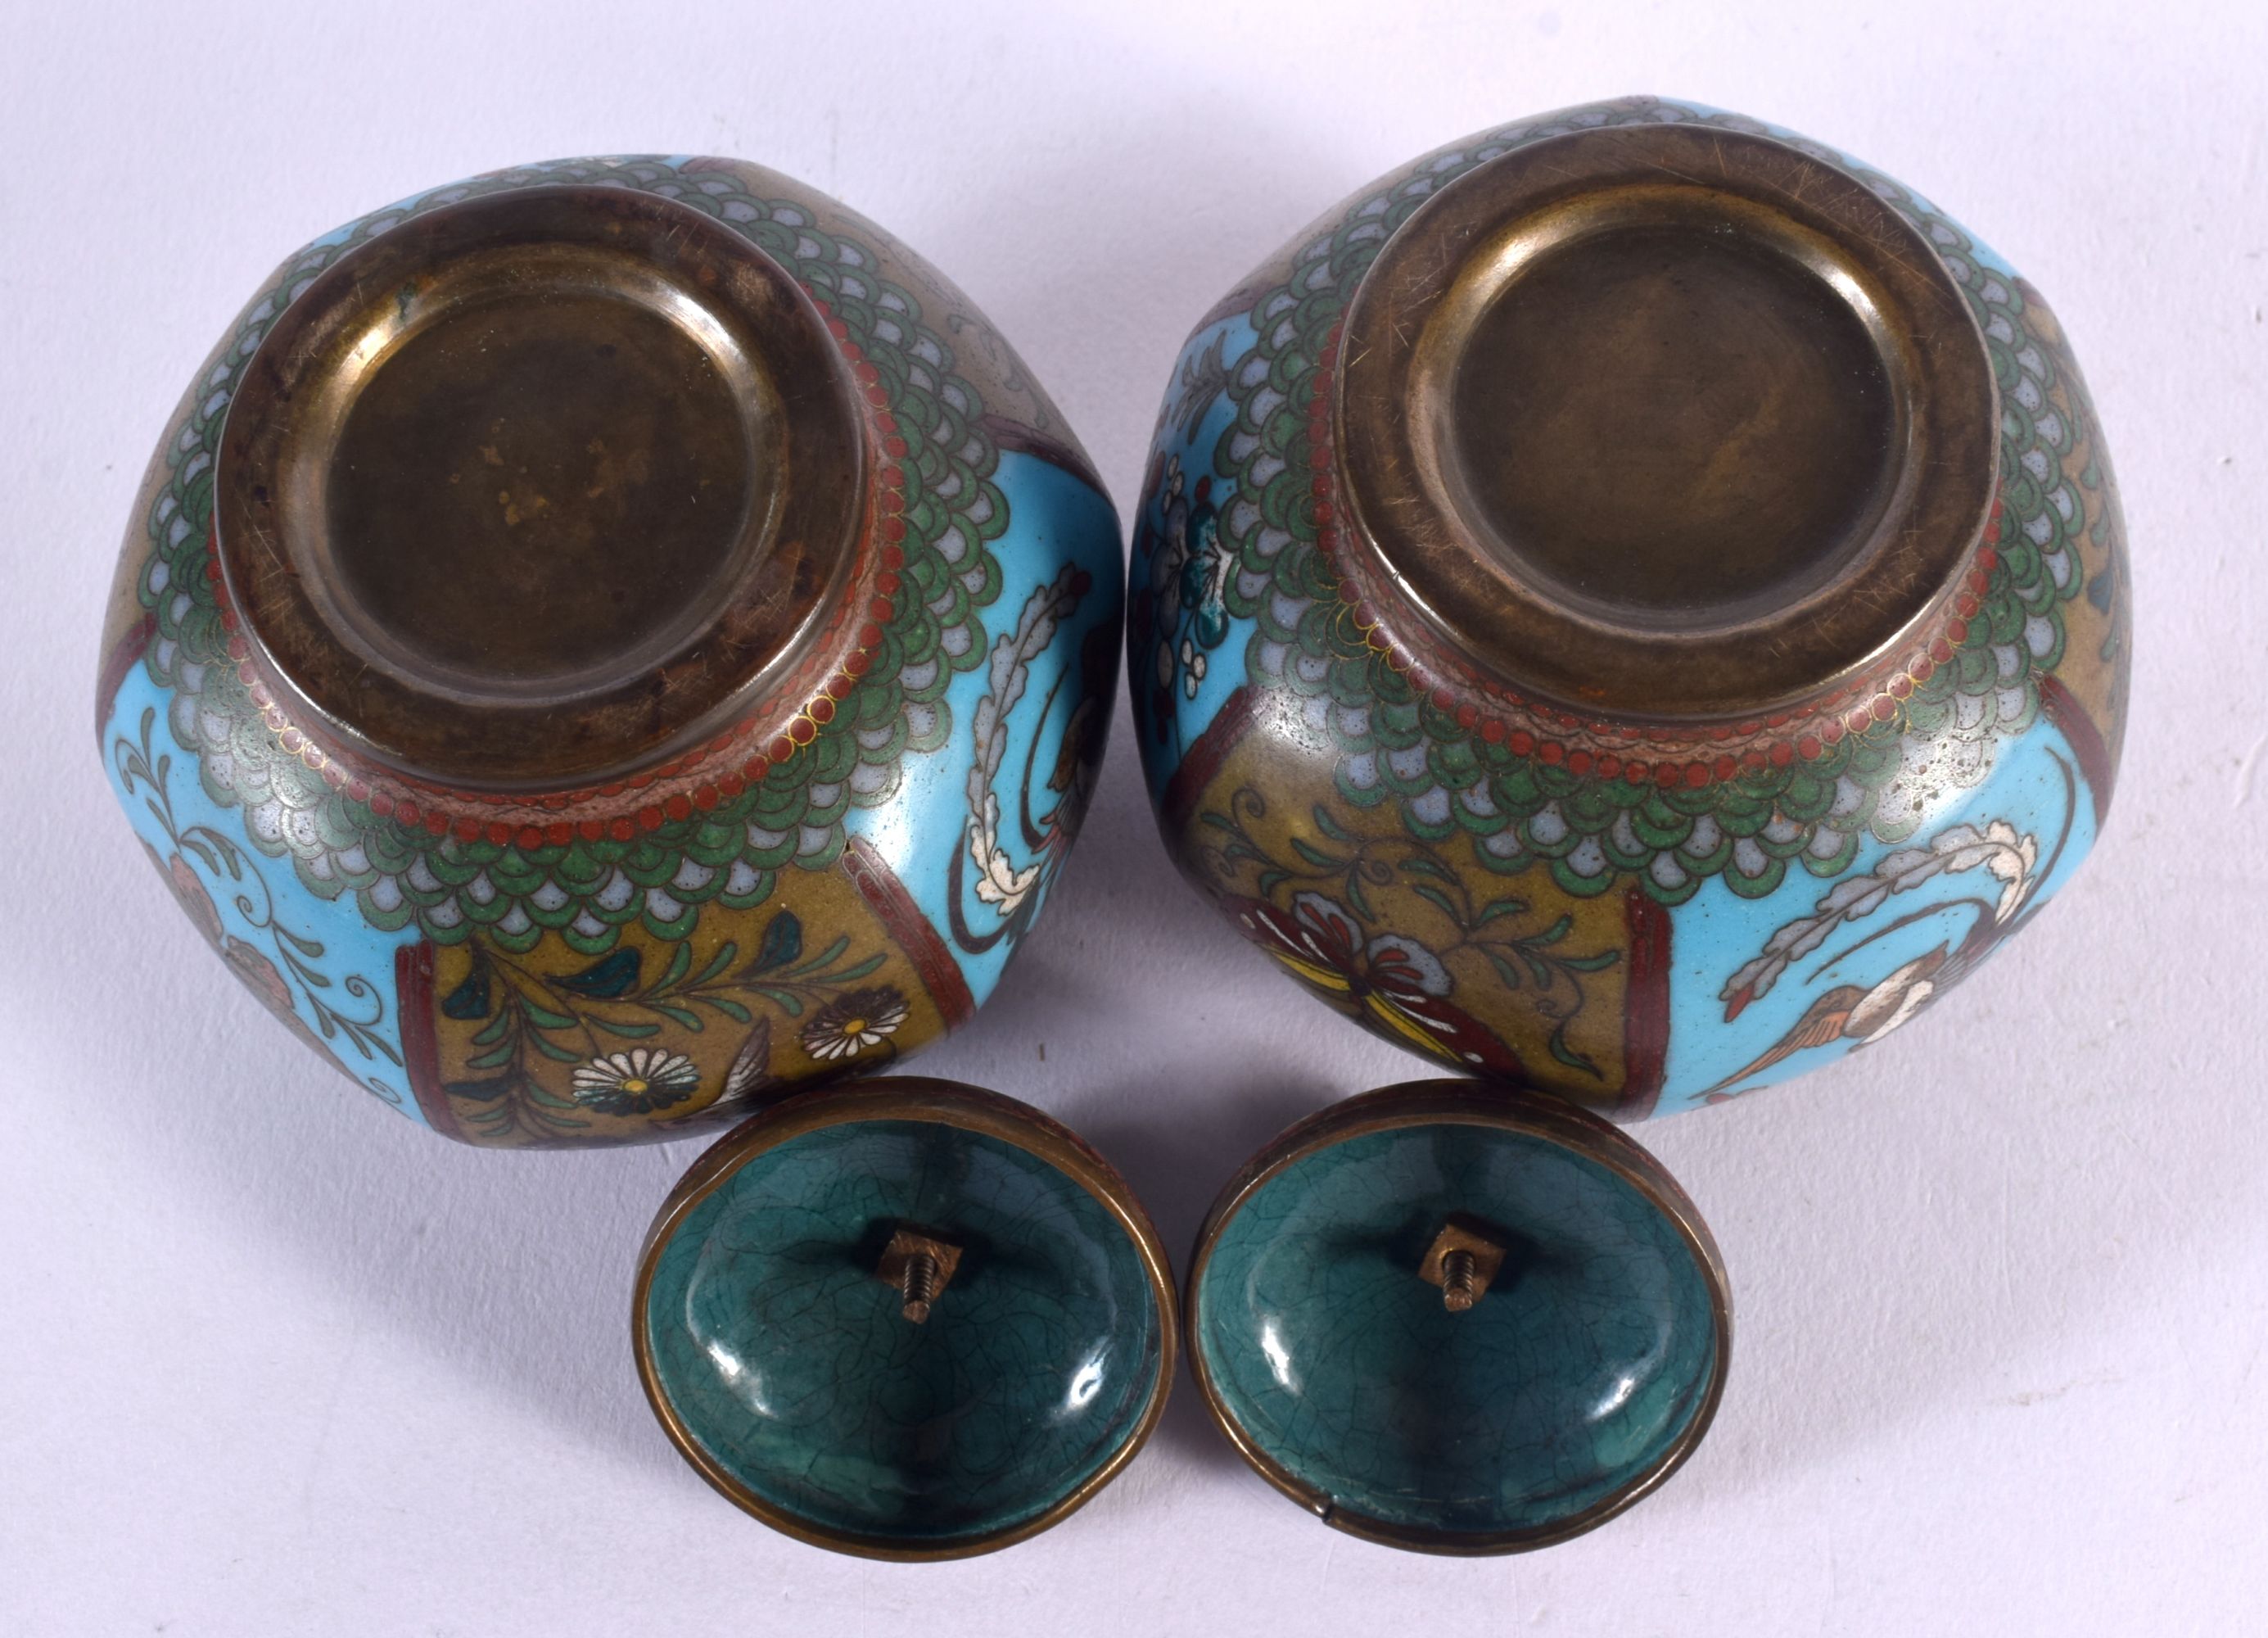 A PAIR OF 19TH CENTURY JAPANESE MEIJI PERIOD CLOISONNE ENAMEL JARS AND COVERS decorated with insects - Image 5 of 5